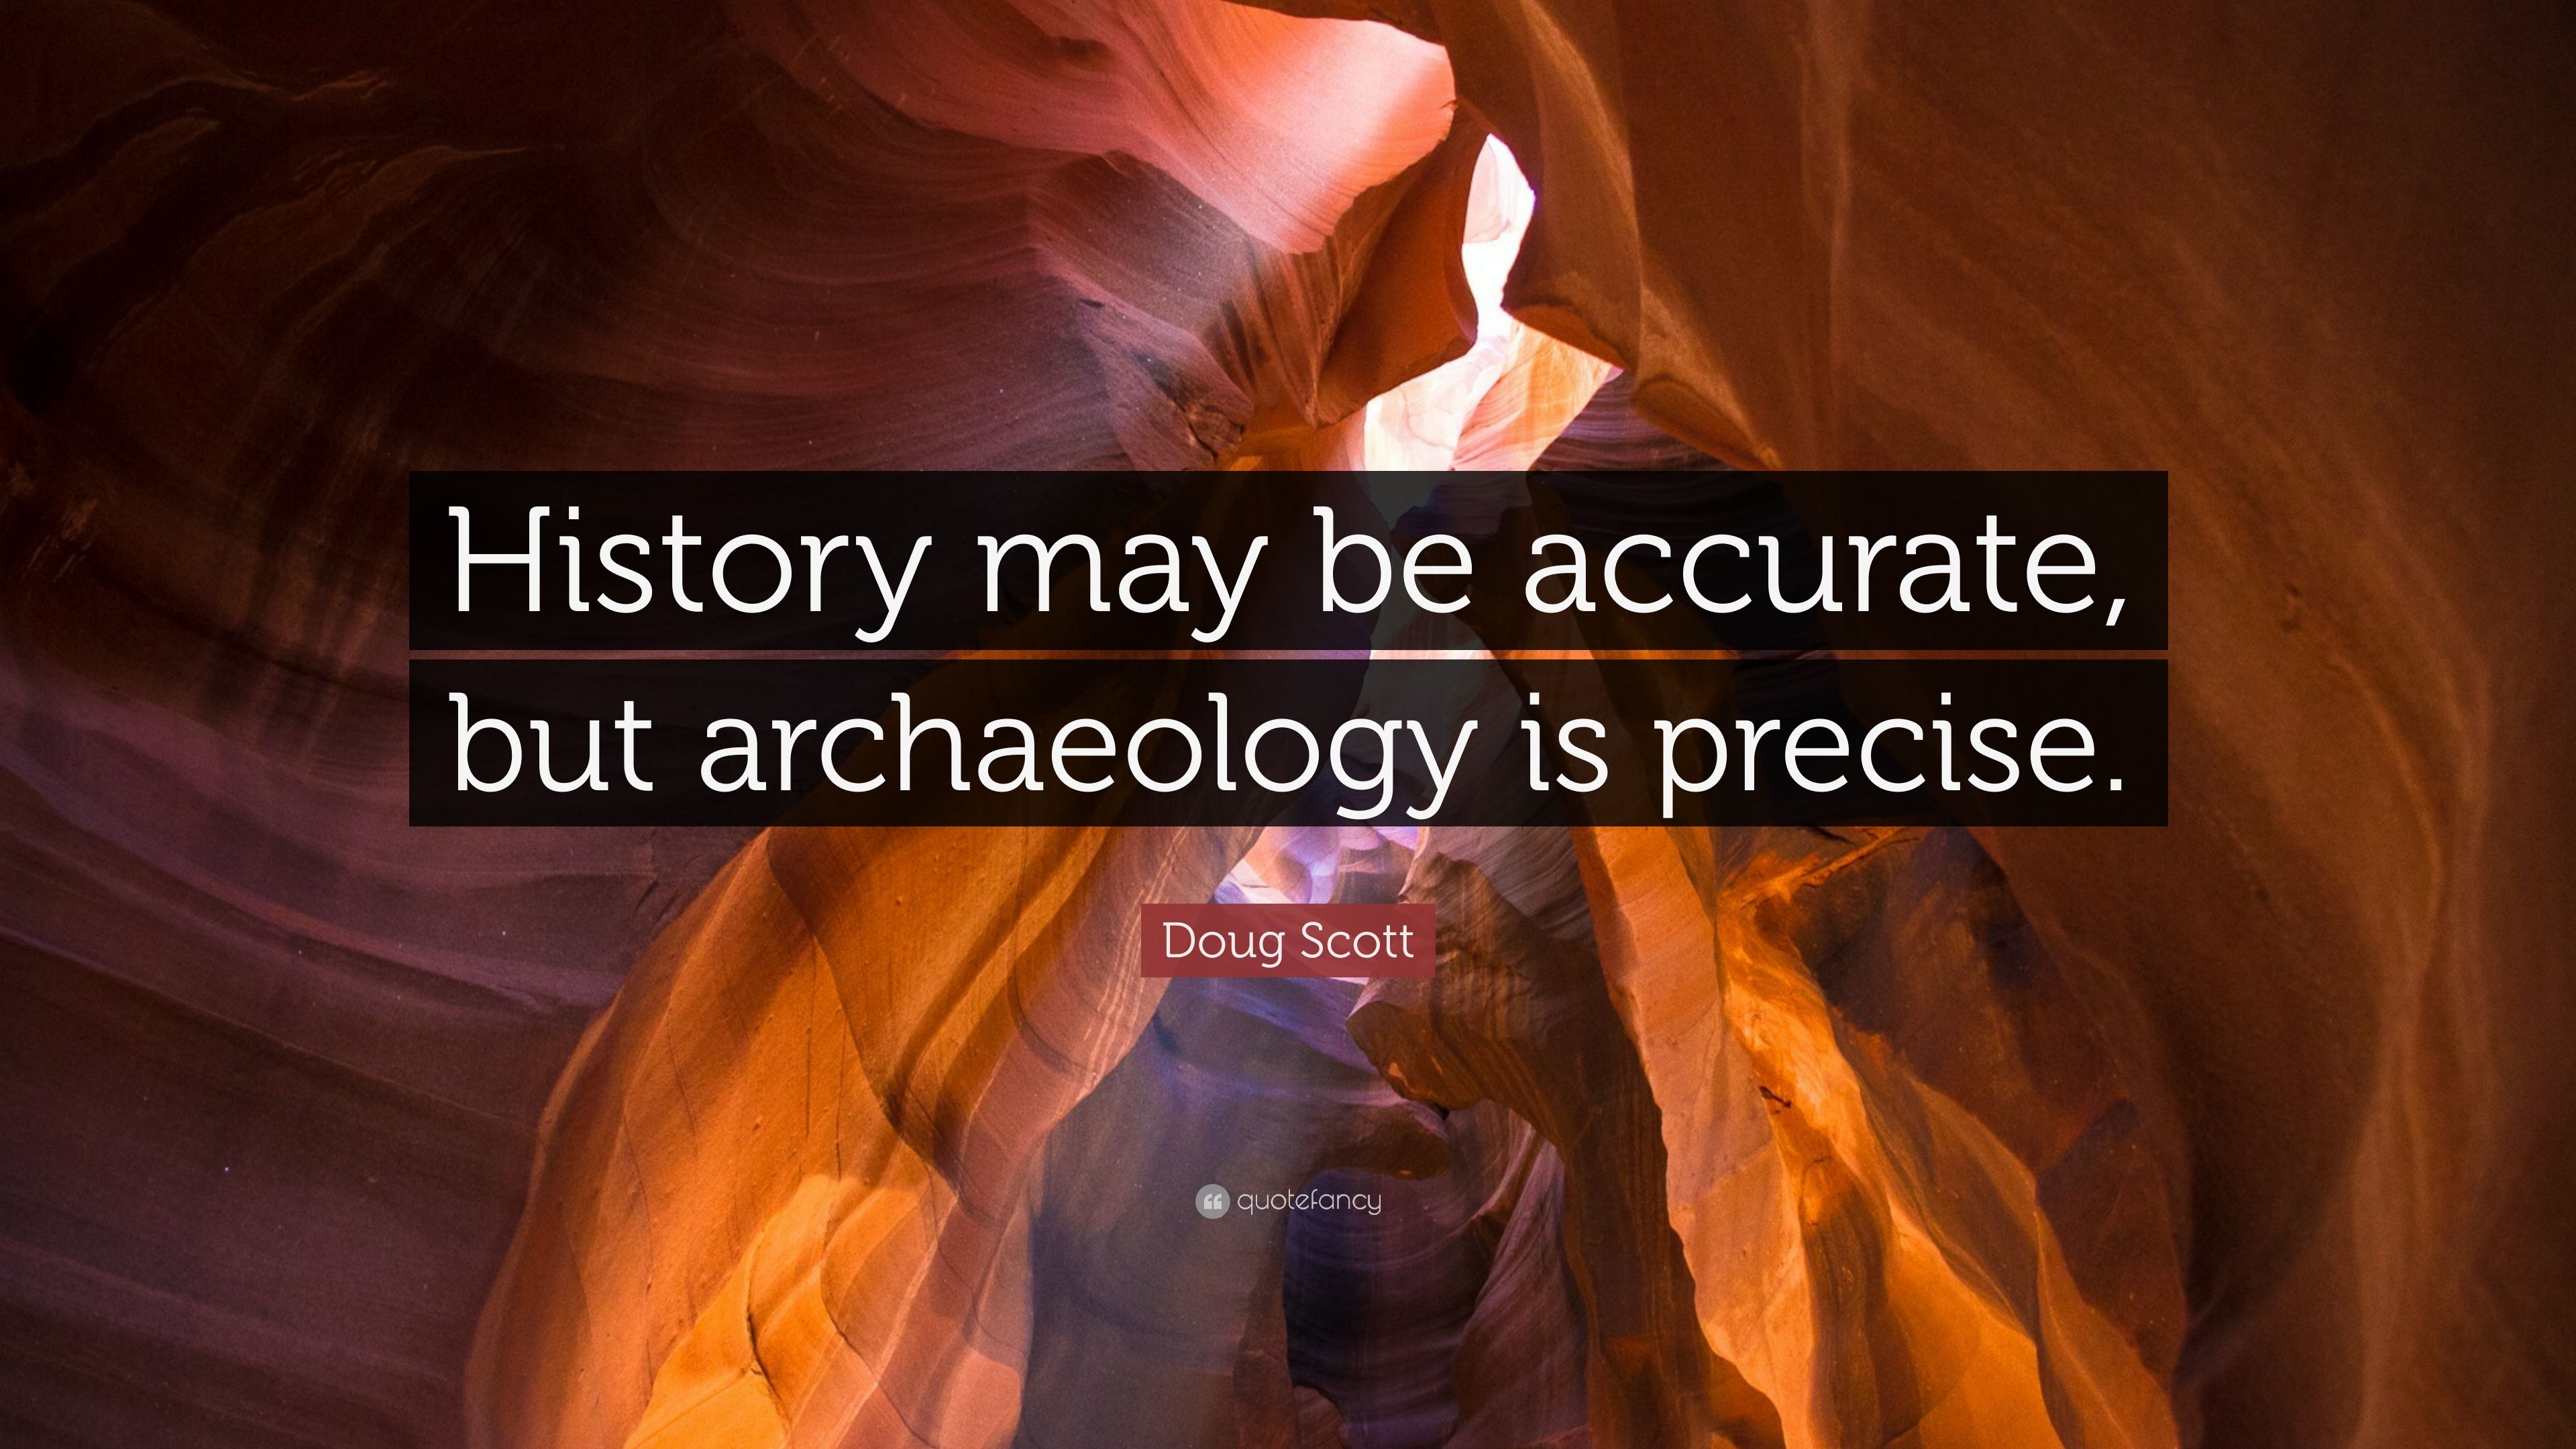 Doug Scott Quote: “History may be accurate, but archaeology is